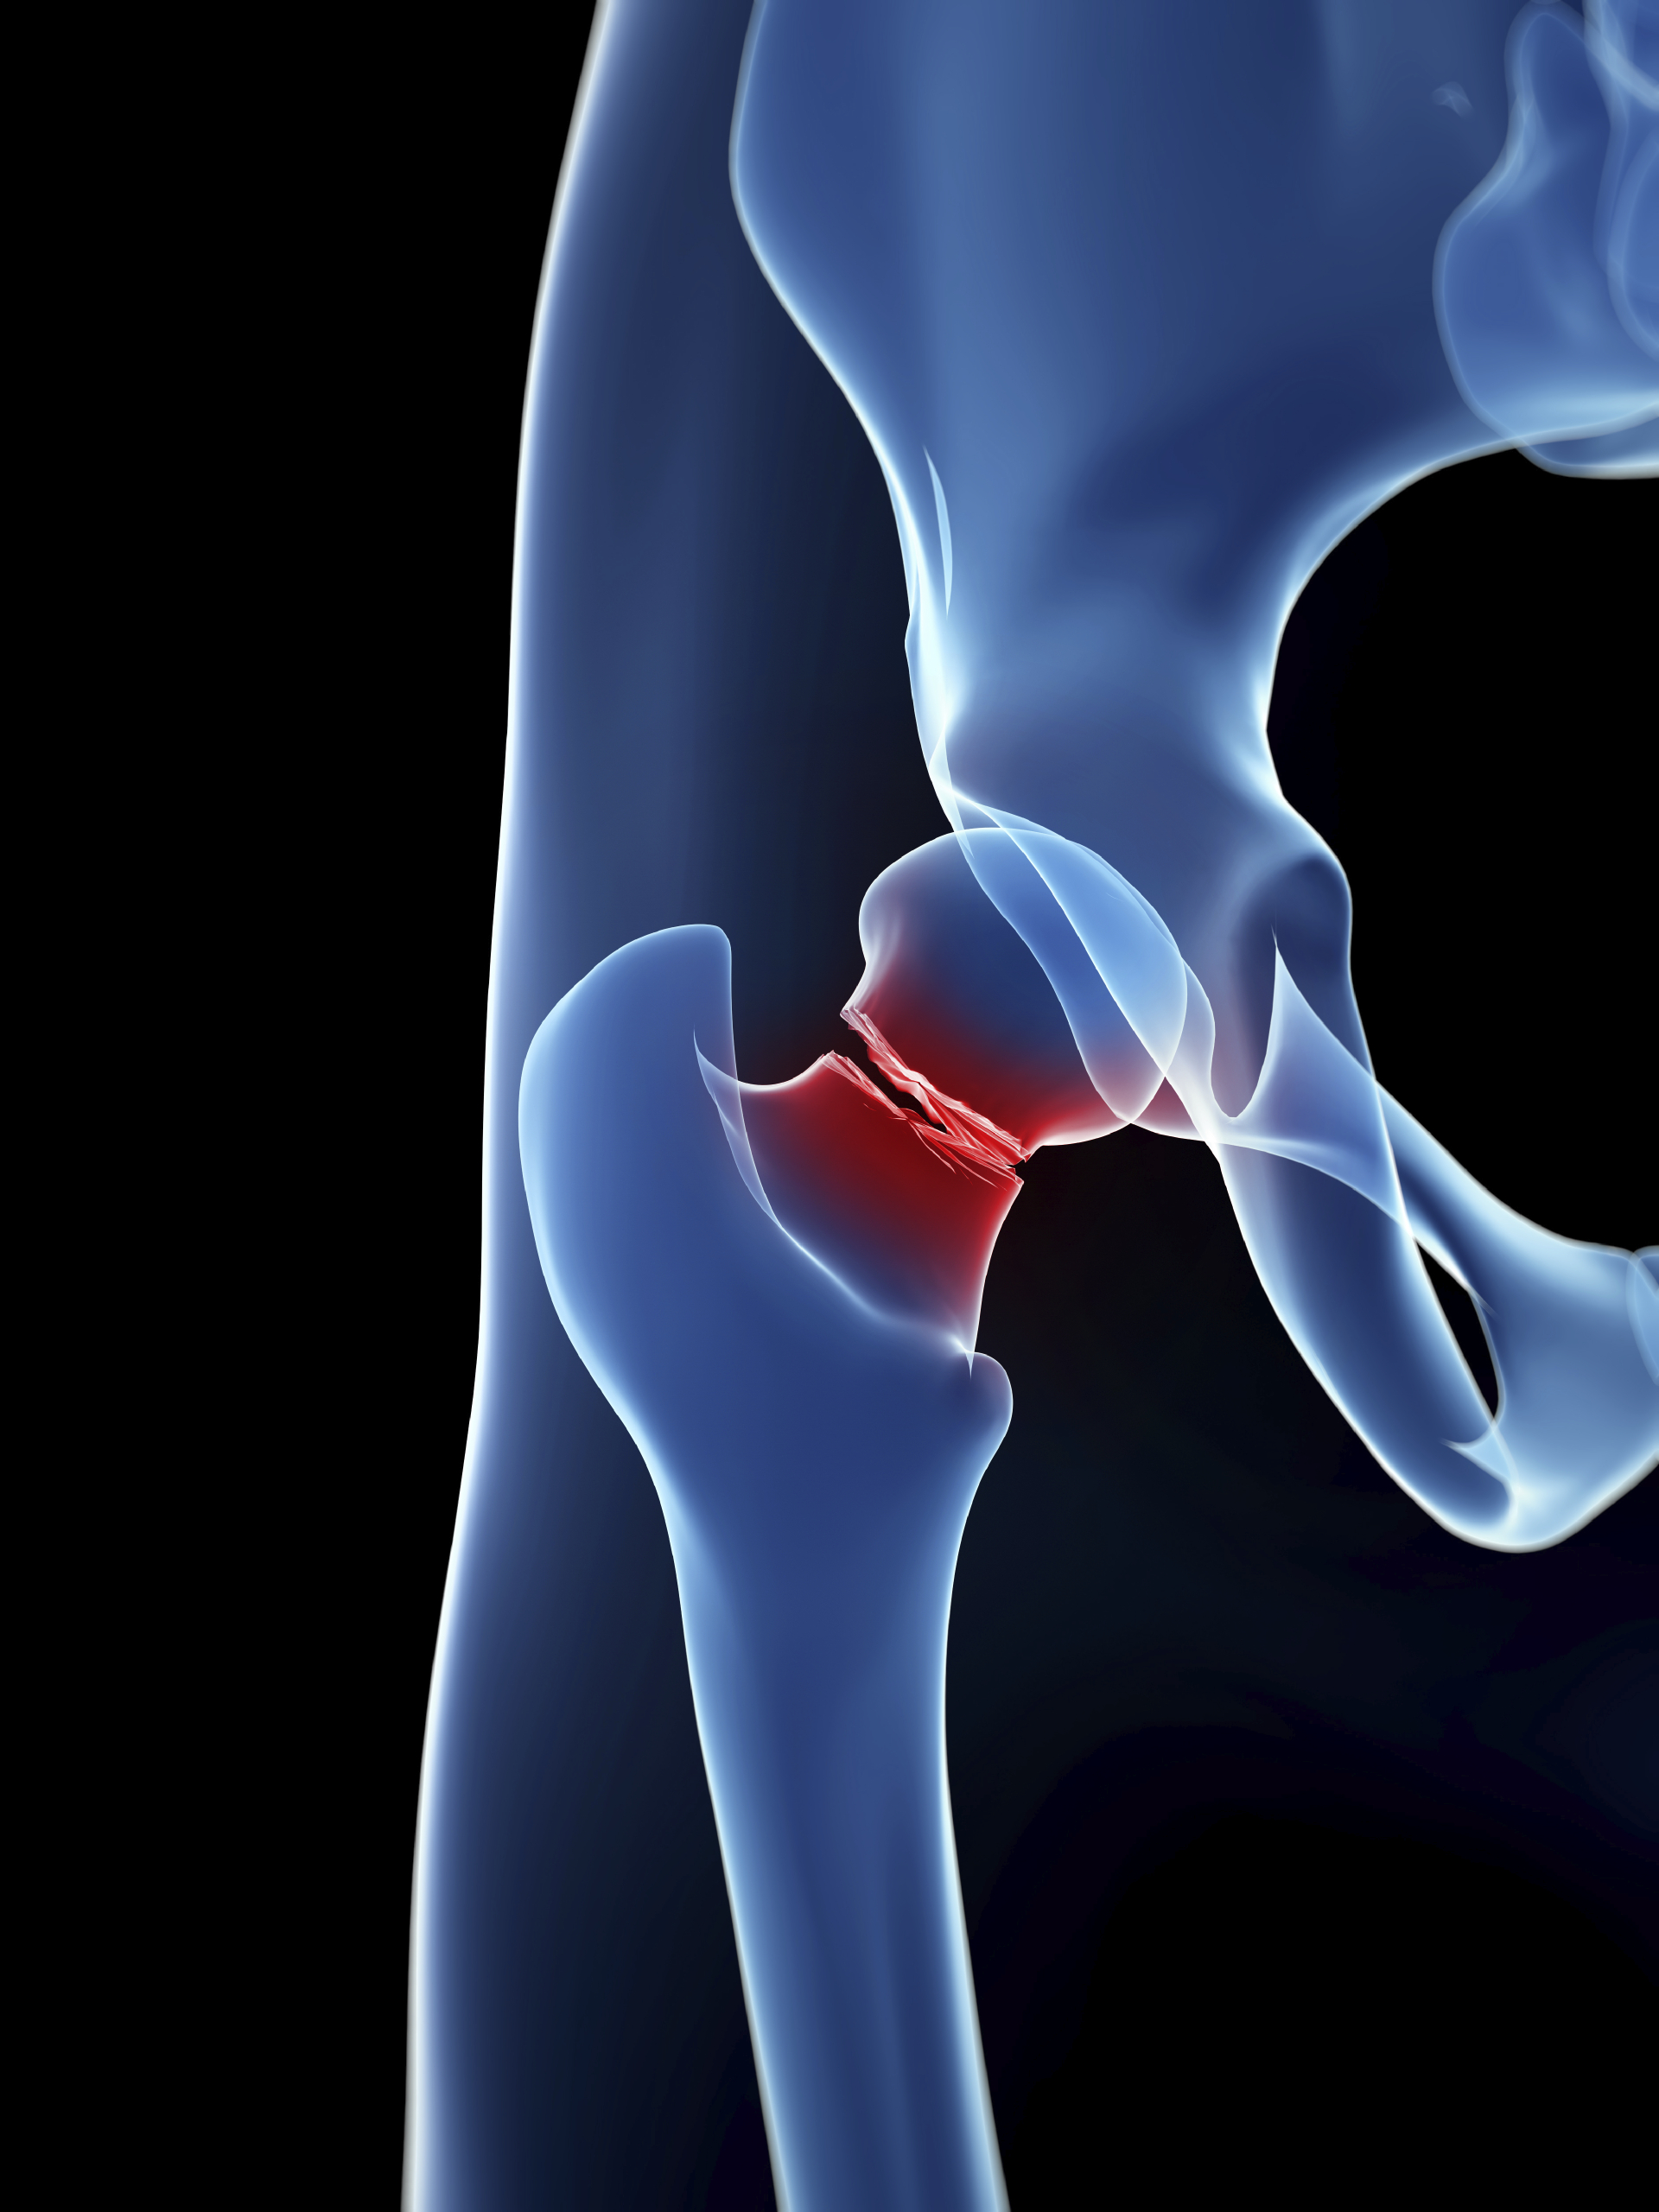 Hip Fractures Among Older Adults